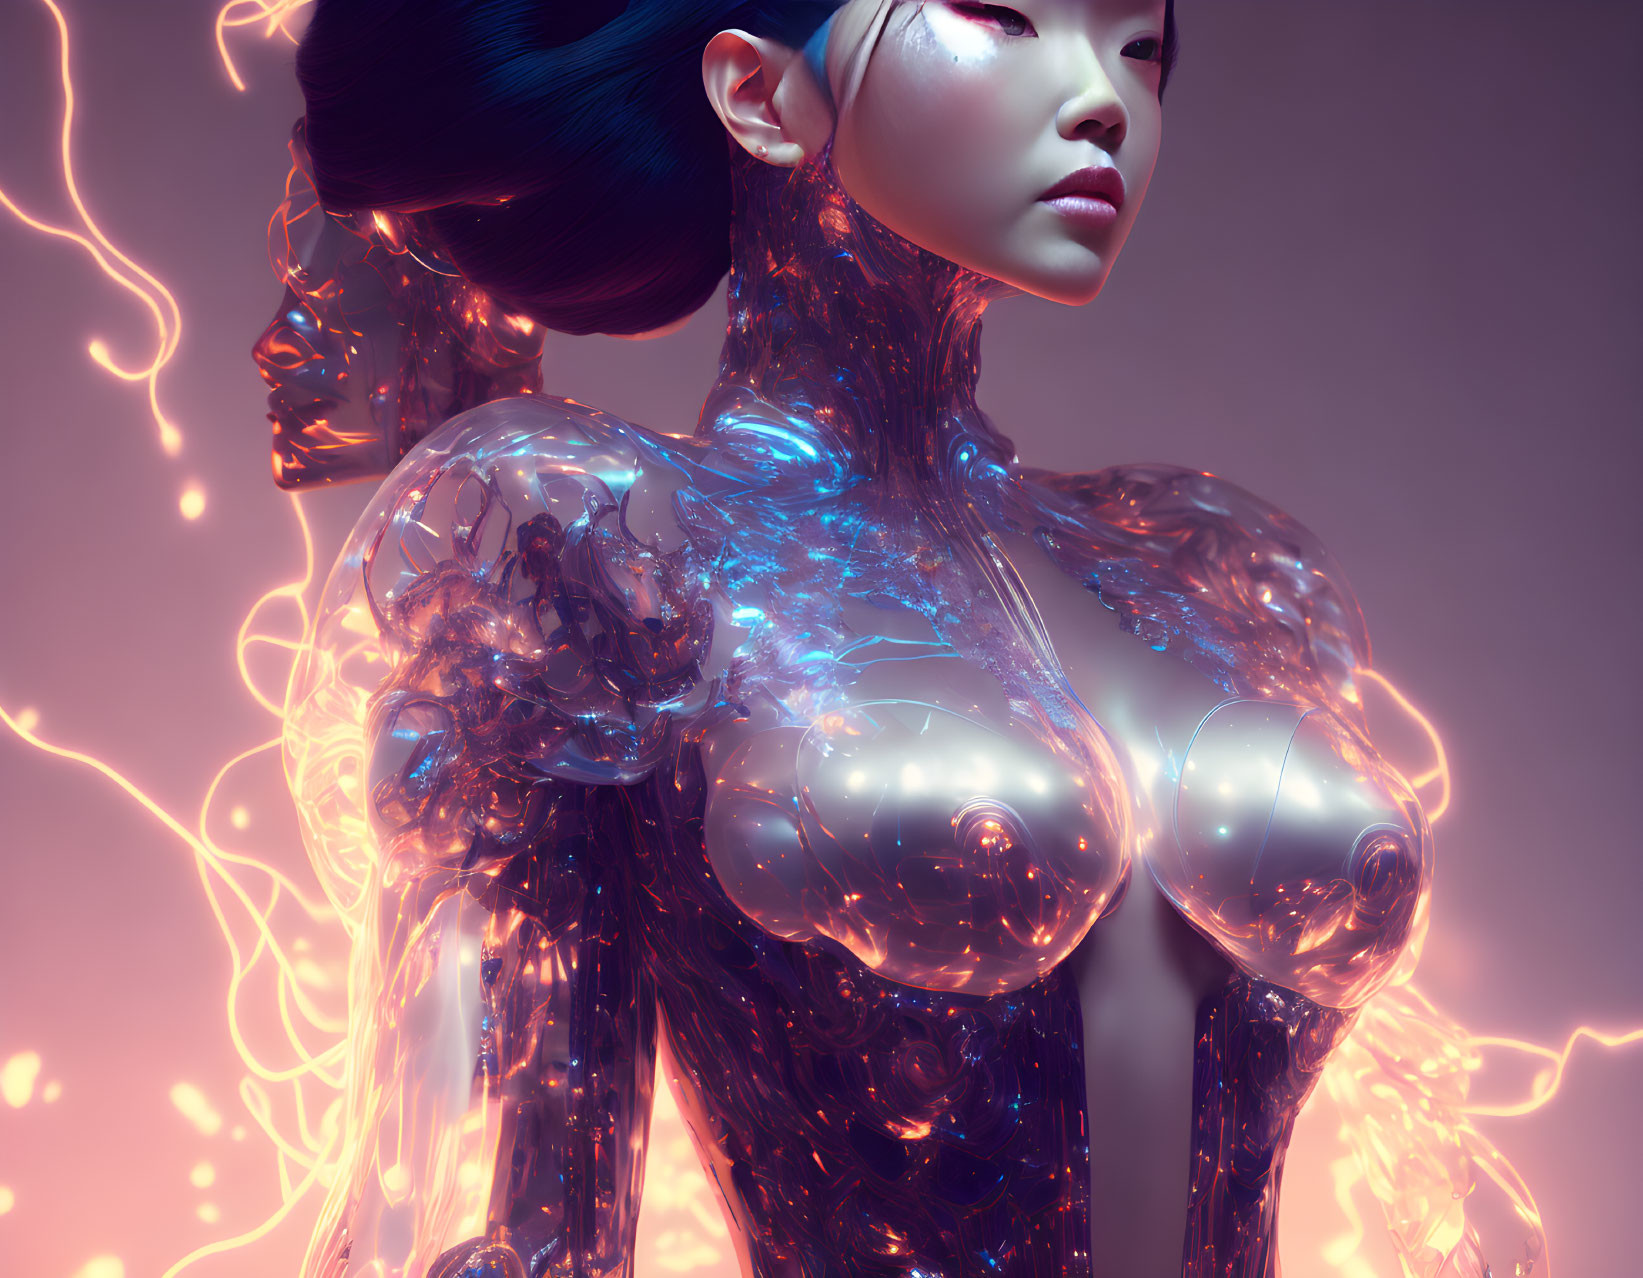 "A 3D full body strange giant glow Transparent and